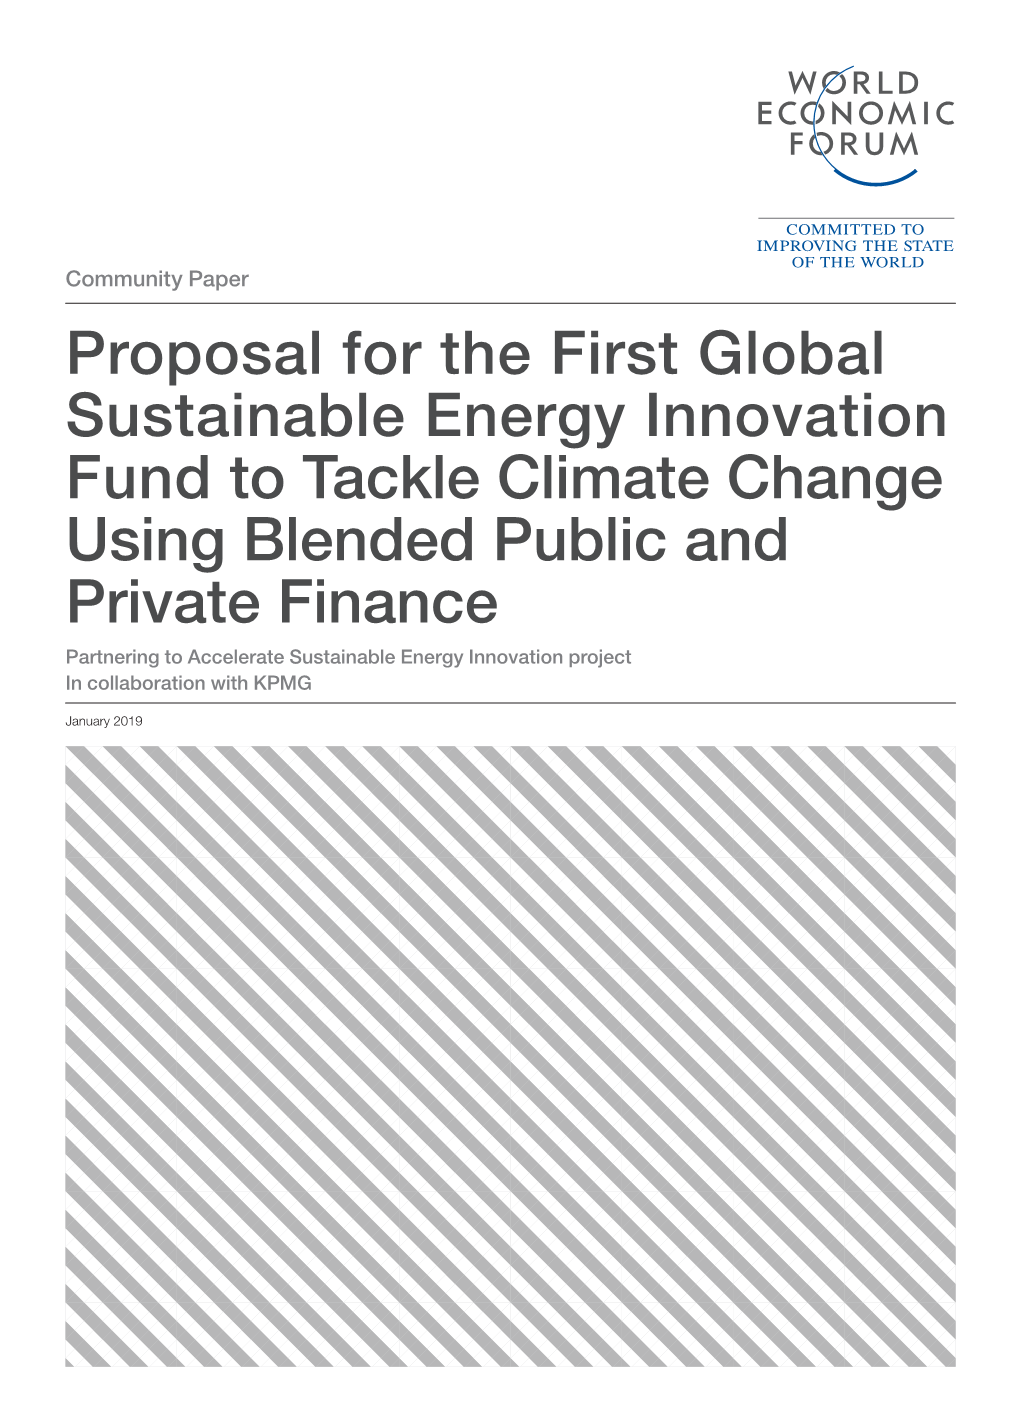 Proposal for the First Global Sustainable Energy